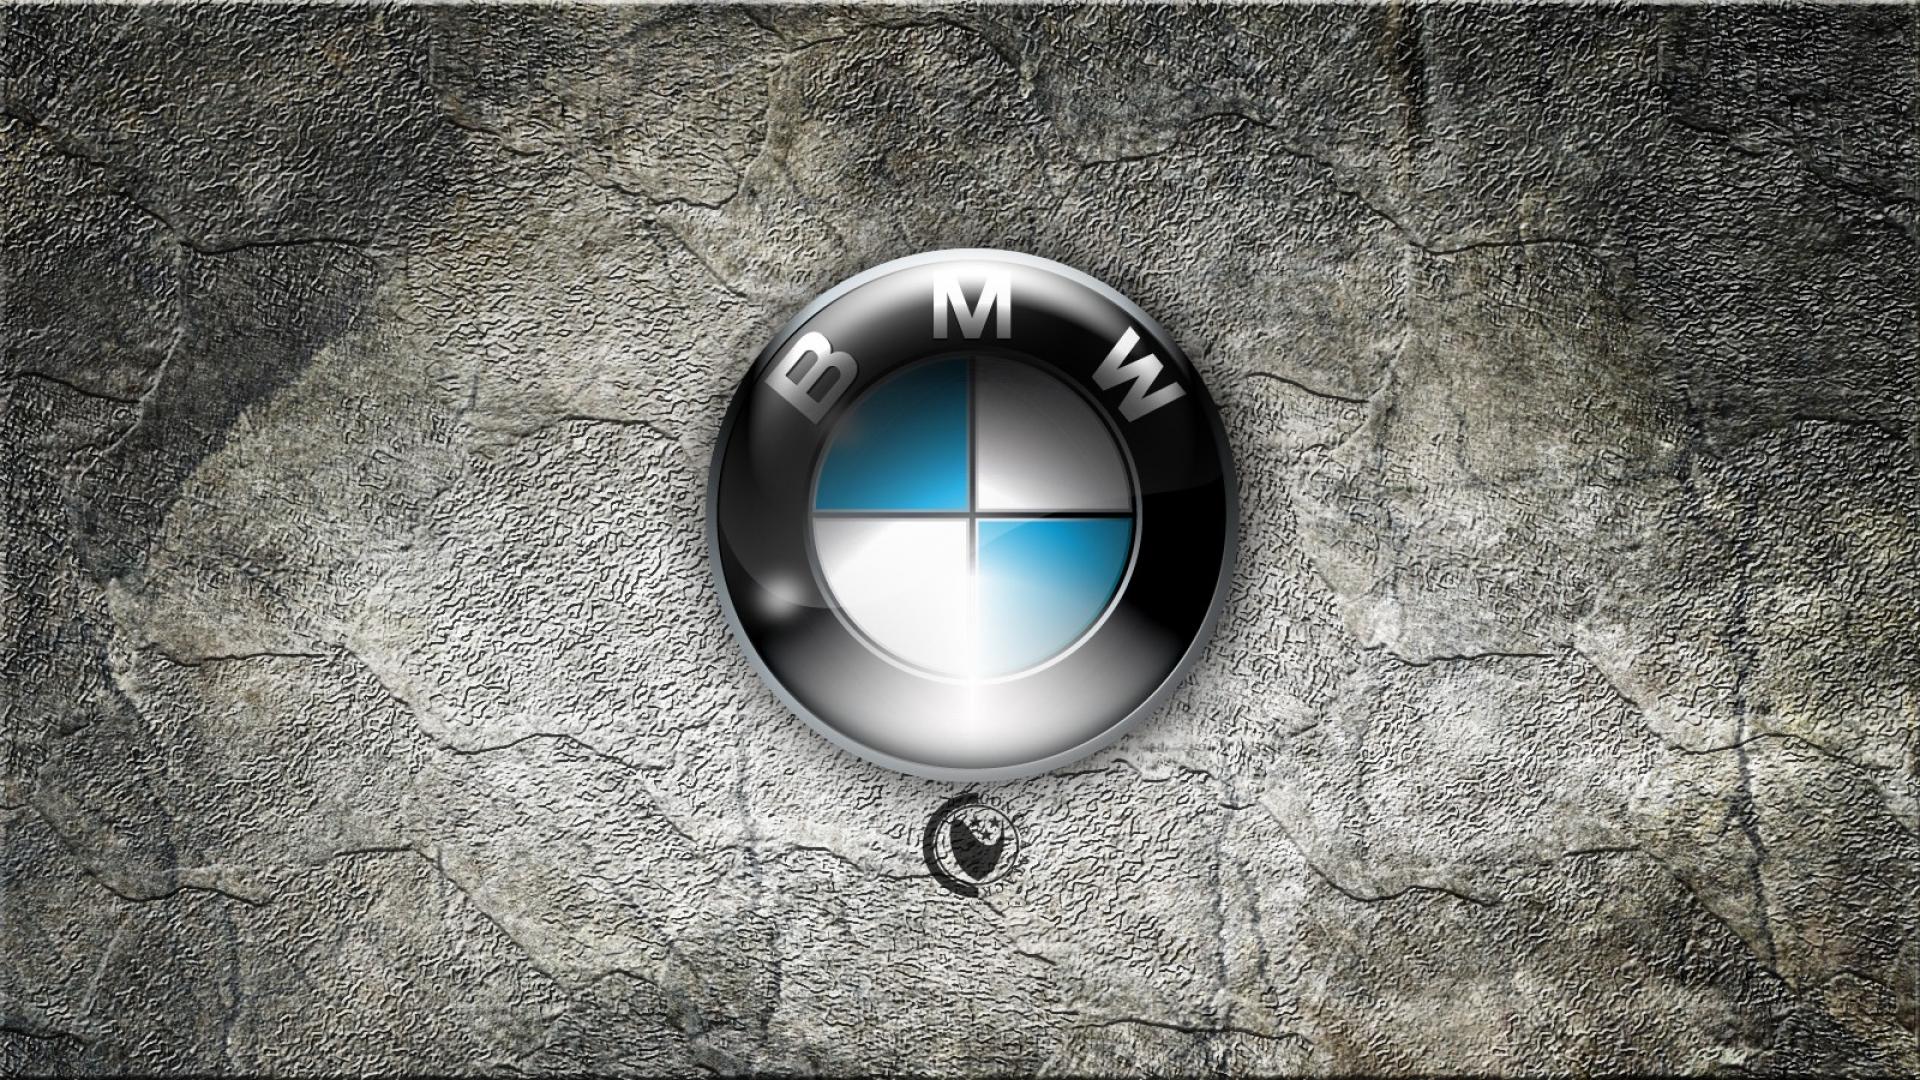 BMW LOGO wallpaper by kevinMandic  Download on ZEDGE  a485